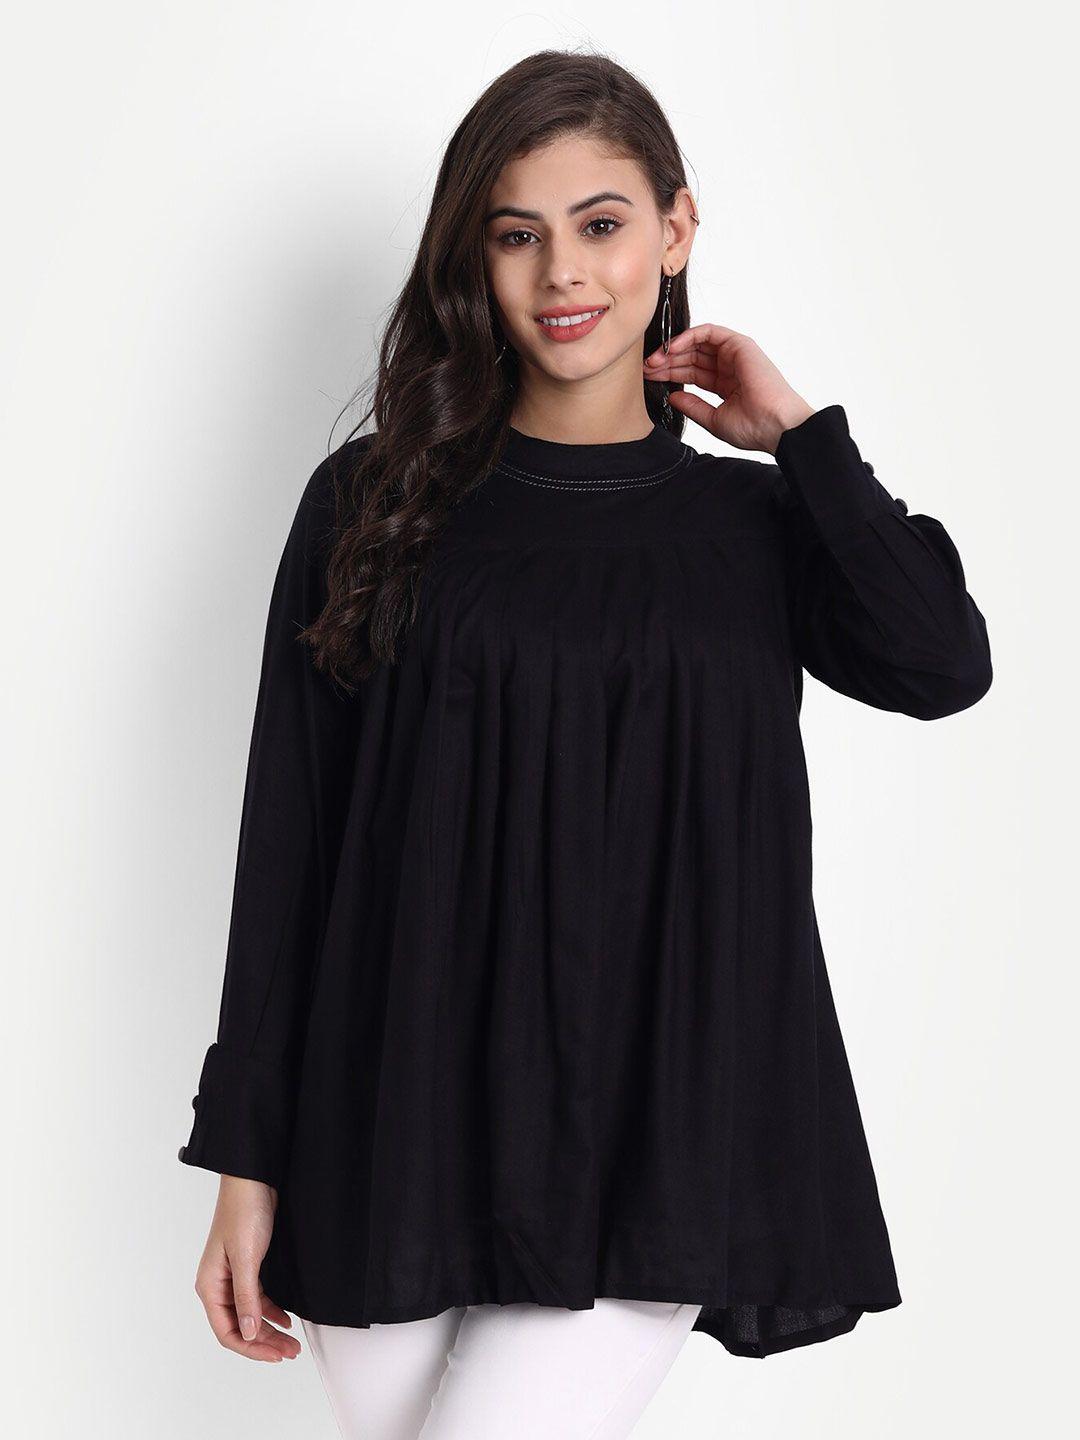 githaan women black solid pleated top